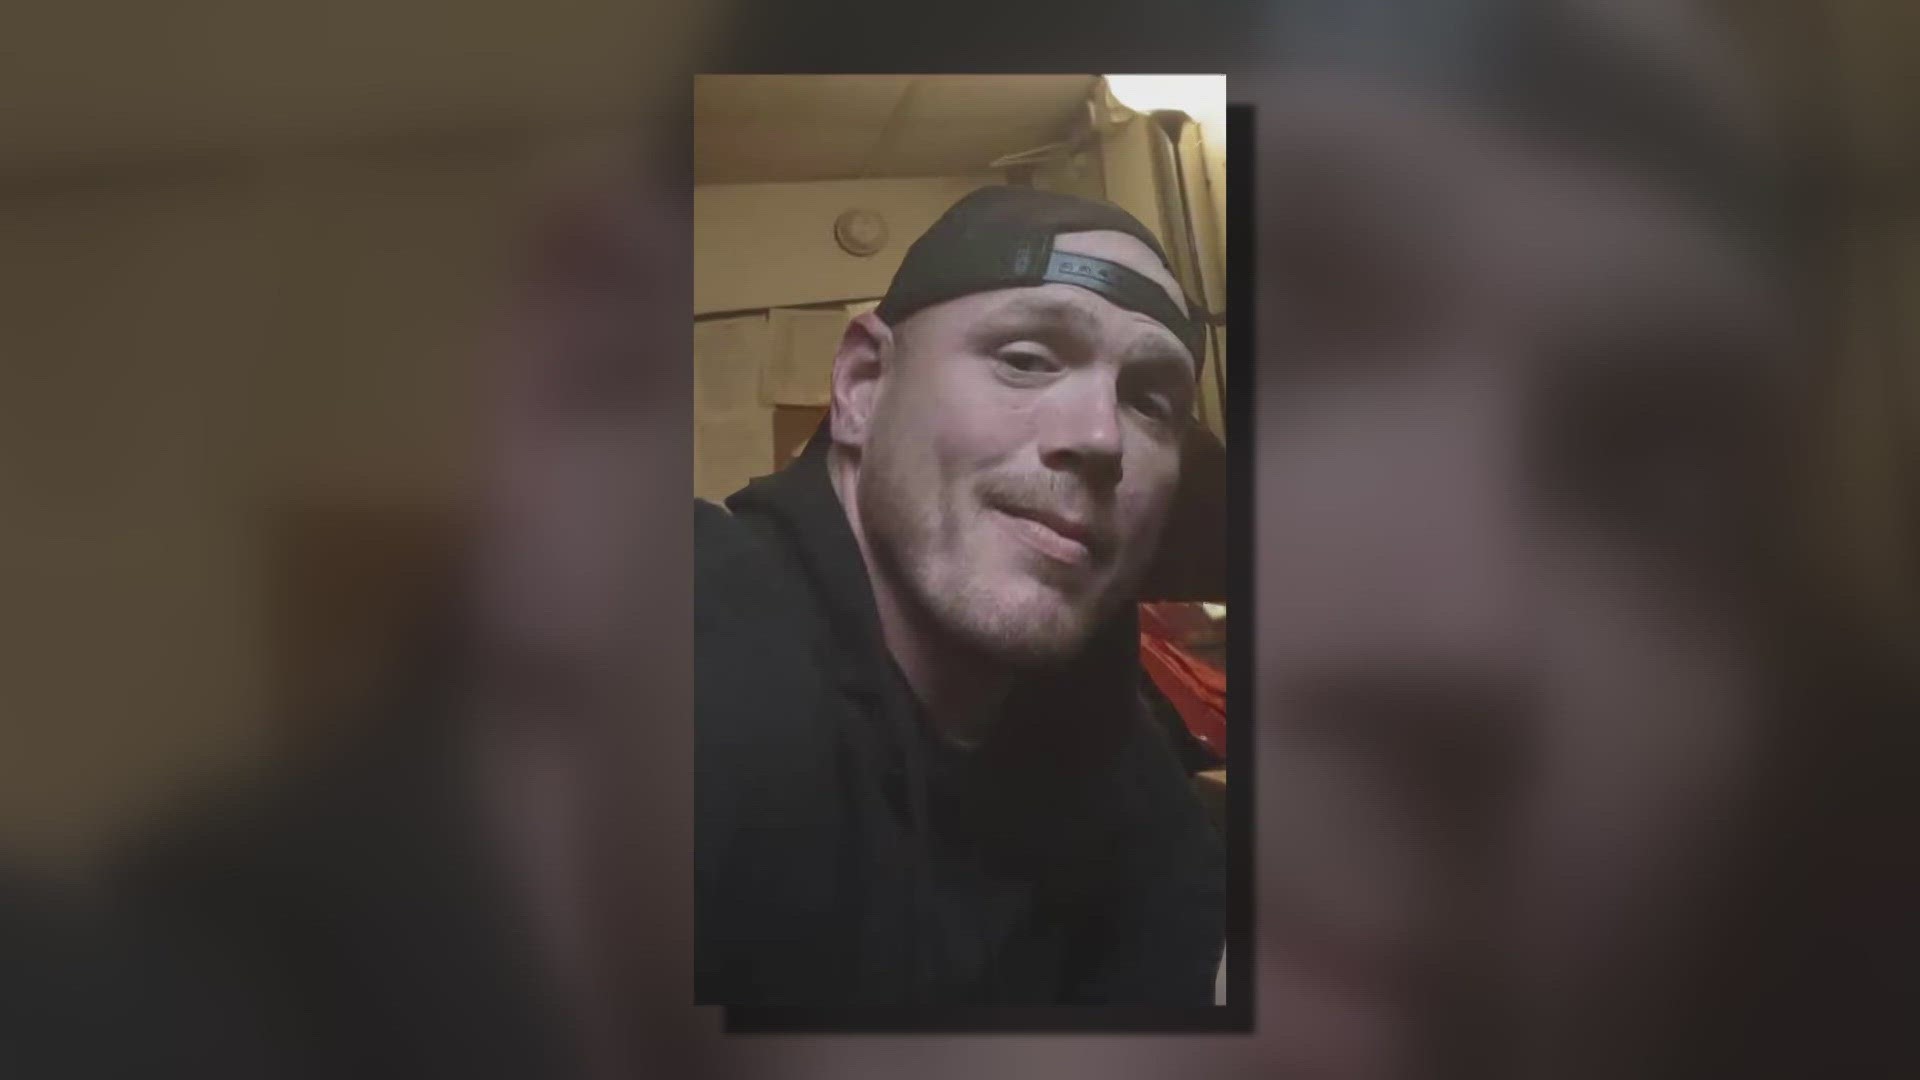 Skeletal remains found in Madison County, Illinois, last week have been identified Monday. The remains are of those belonging to Vernon L. Law, 36.